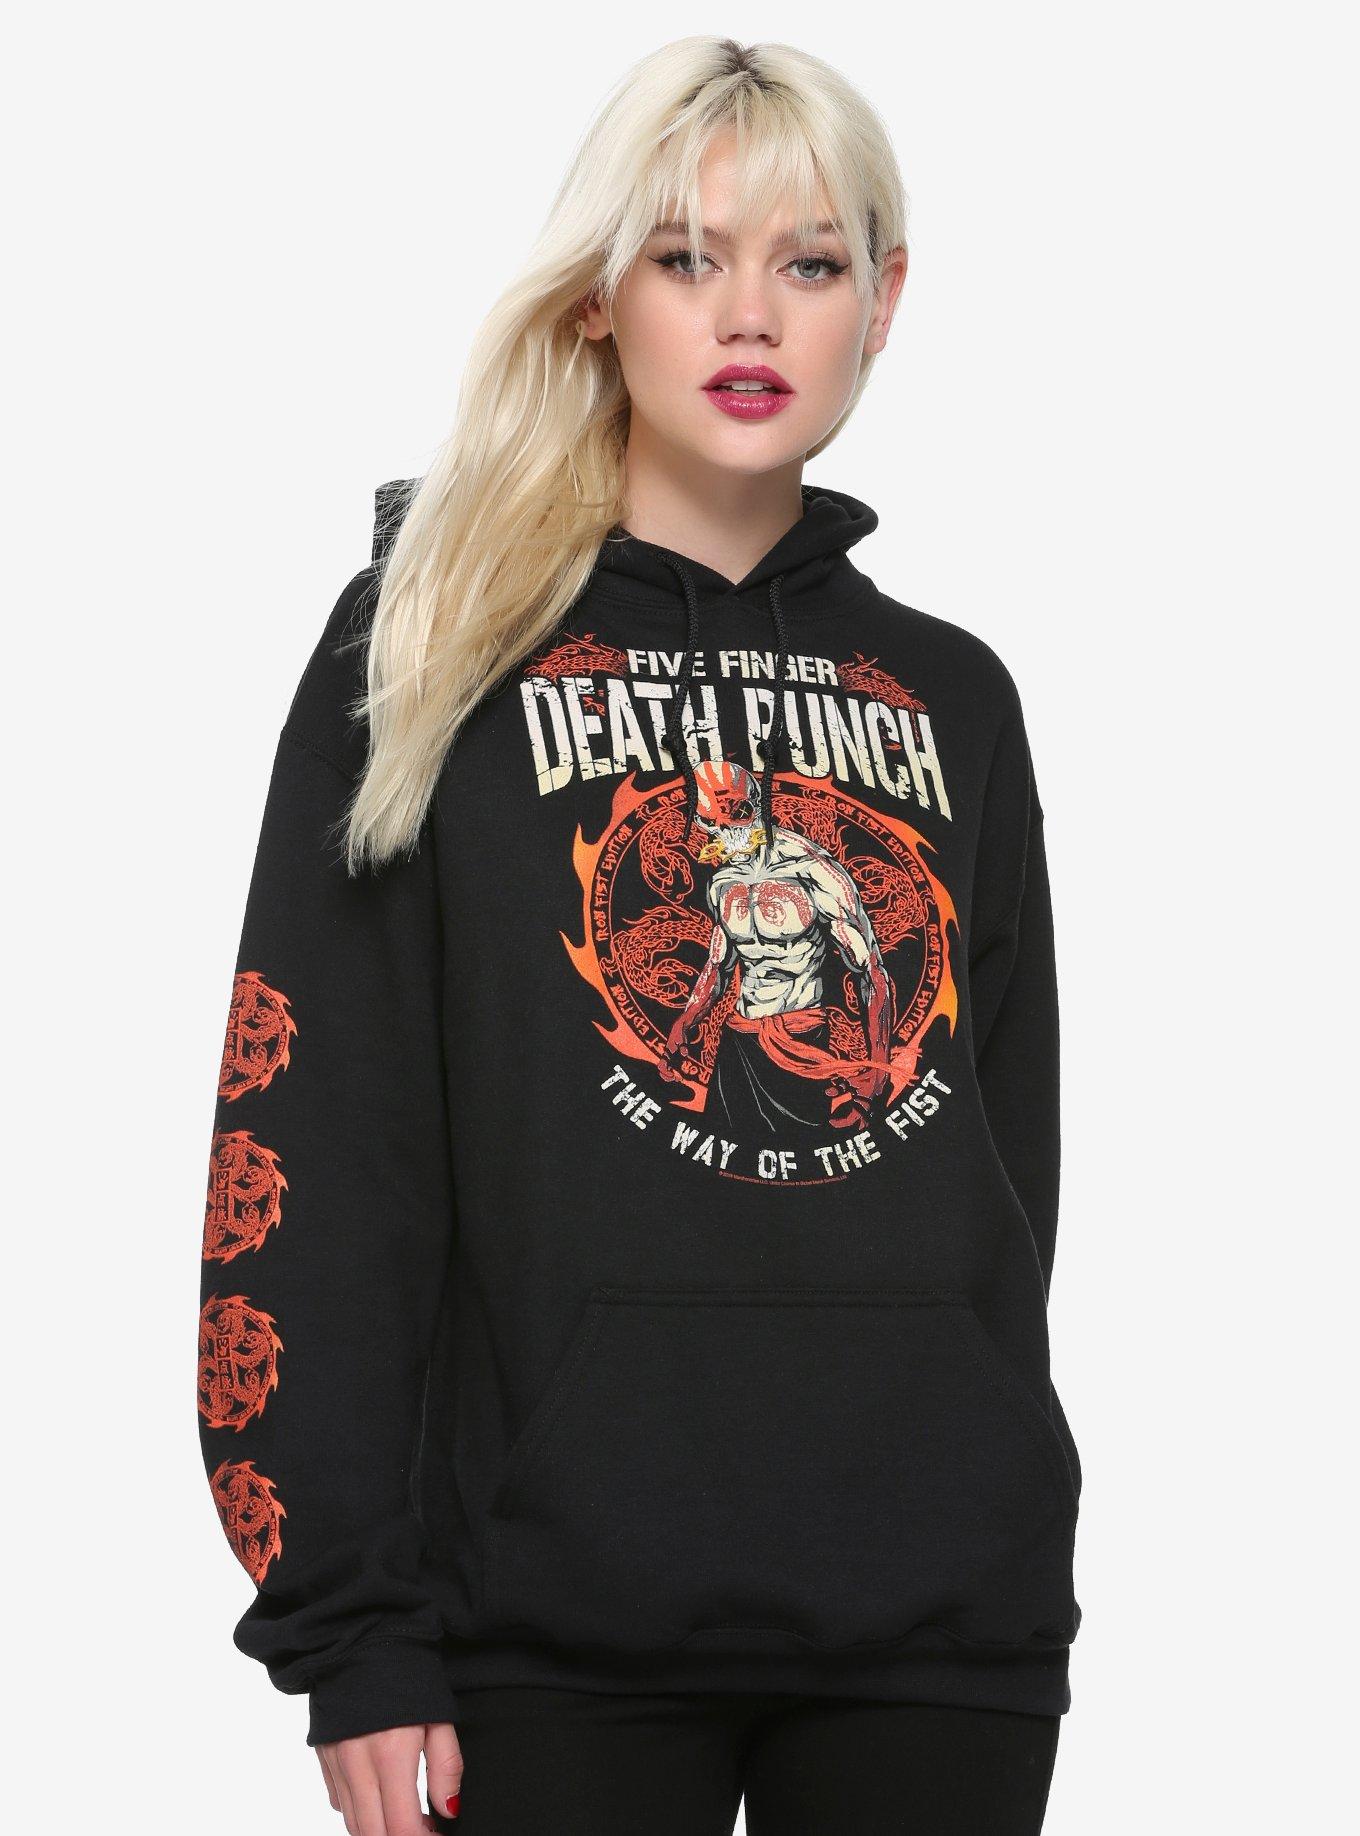 Five Finger Death Punch The Way Of The Fist Girls Hoodie | Hot Topic